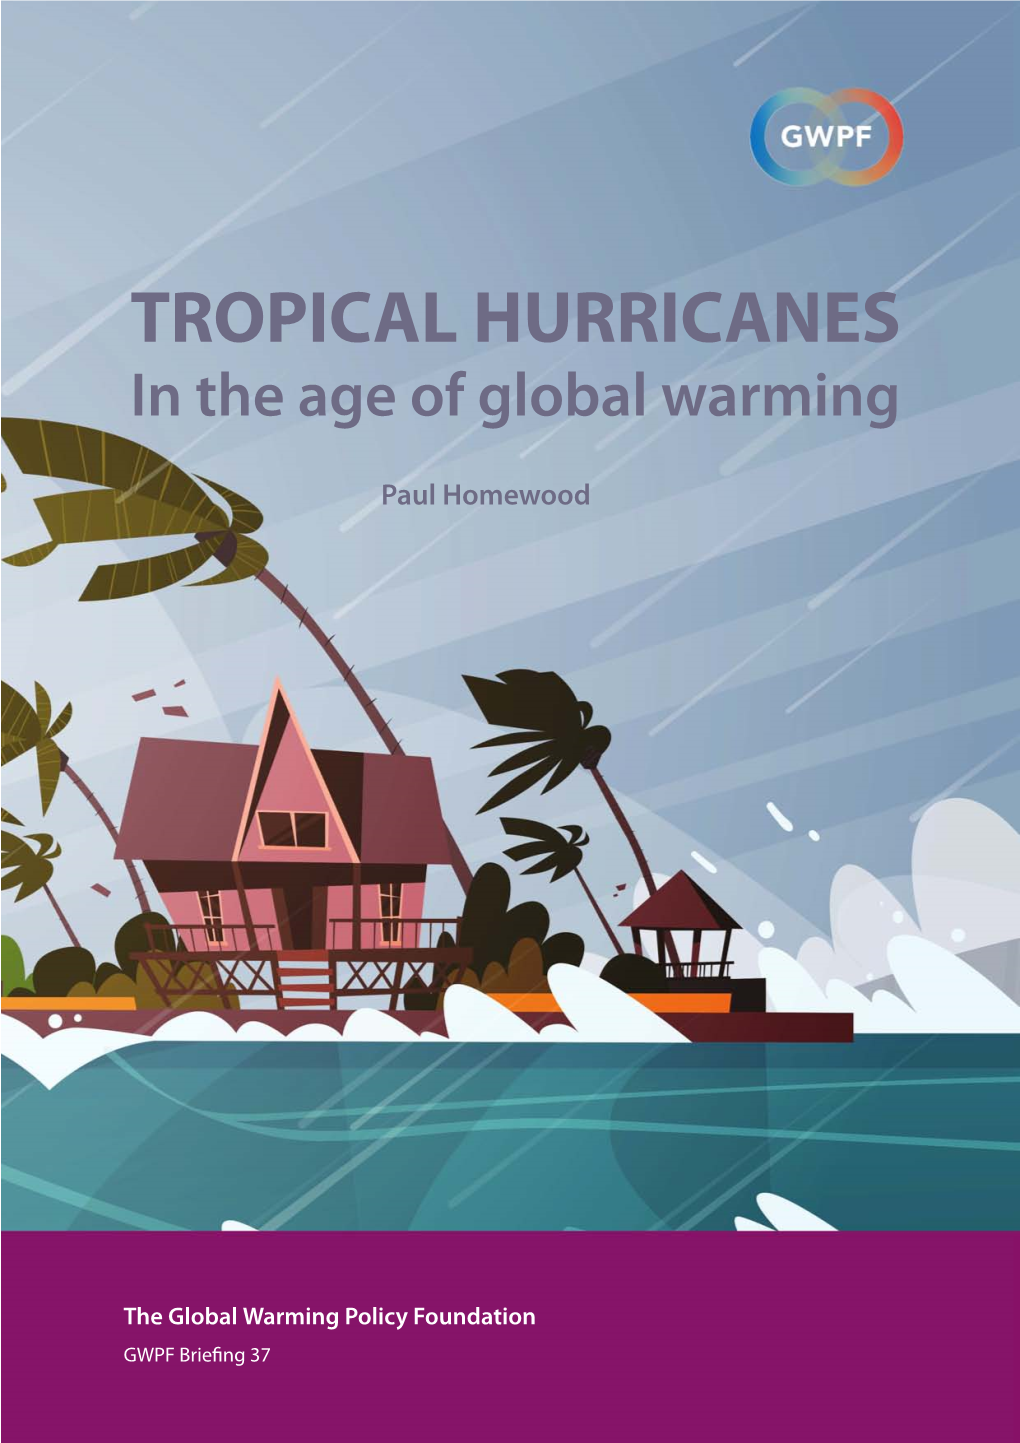 TROPICAL HURRICANES in the Age of Global Warming